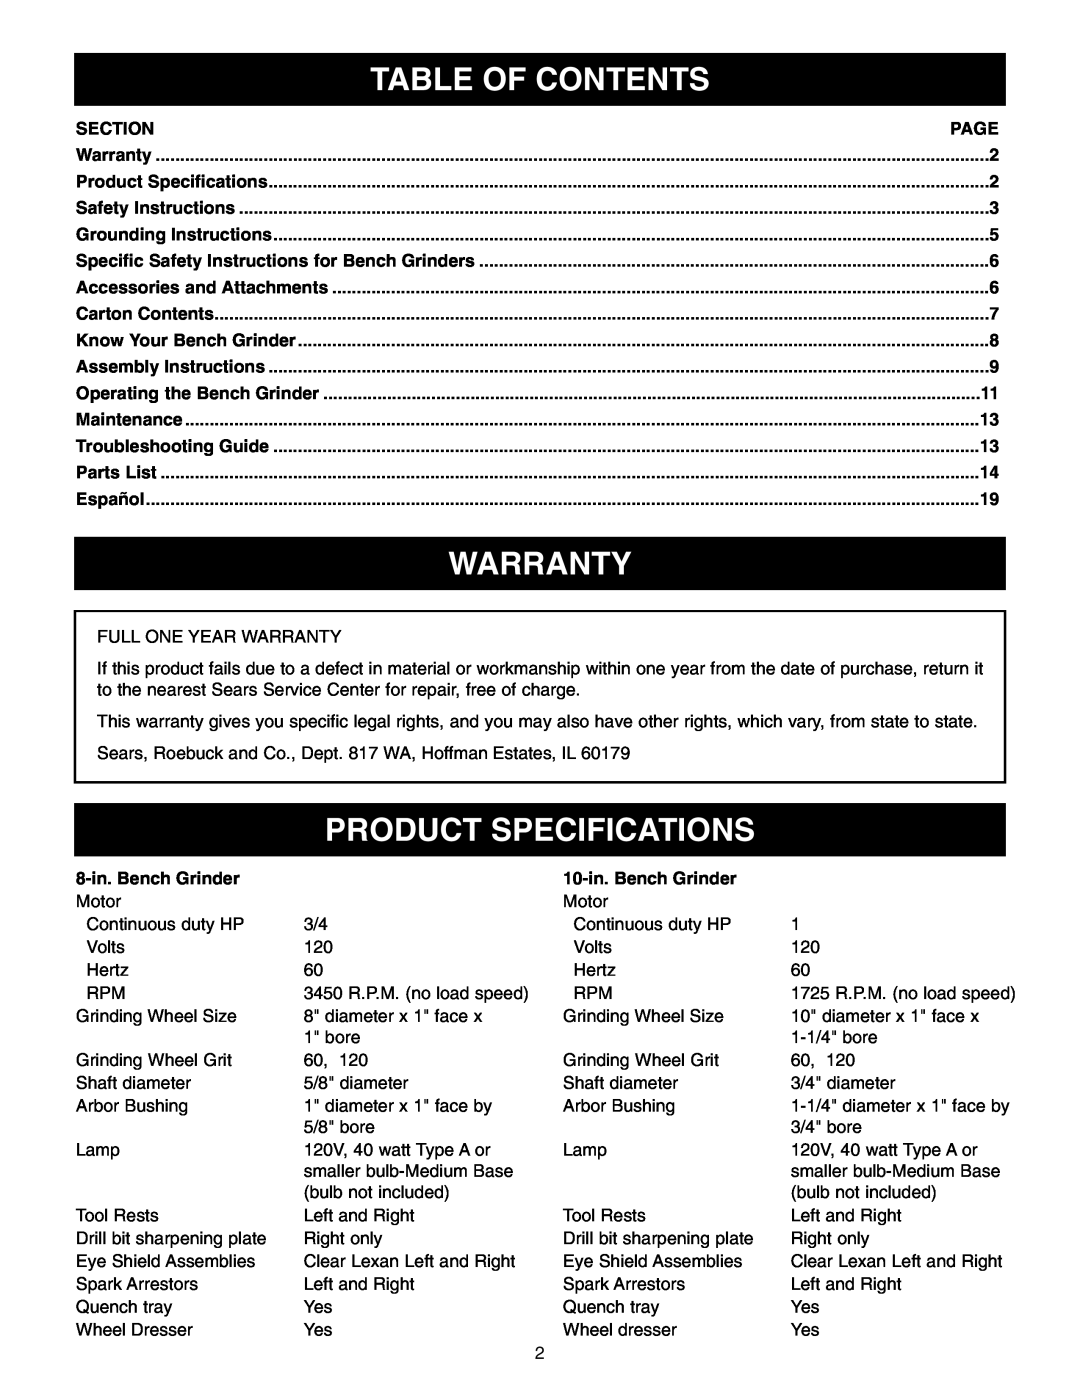 Craftsman 152.22018 owner manual Table Of Contents, Warranty, Product Specifications, Section, Page, 8-in. Bench Grinder 